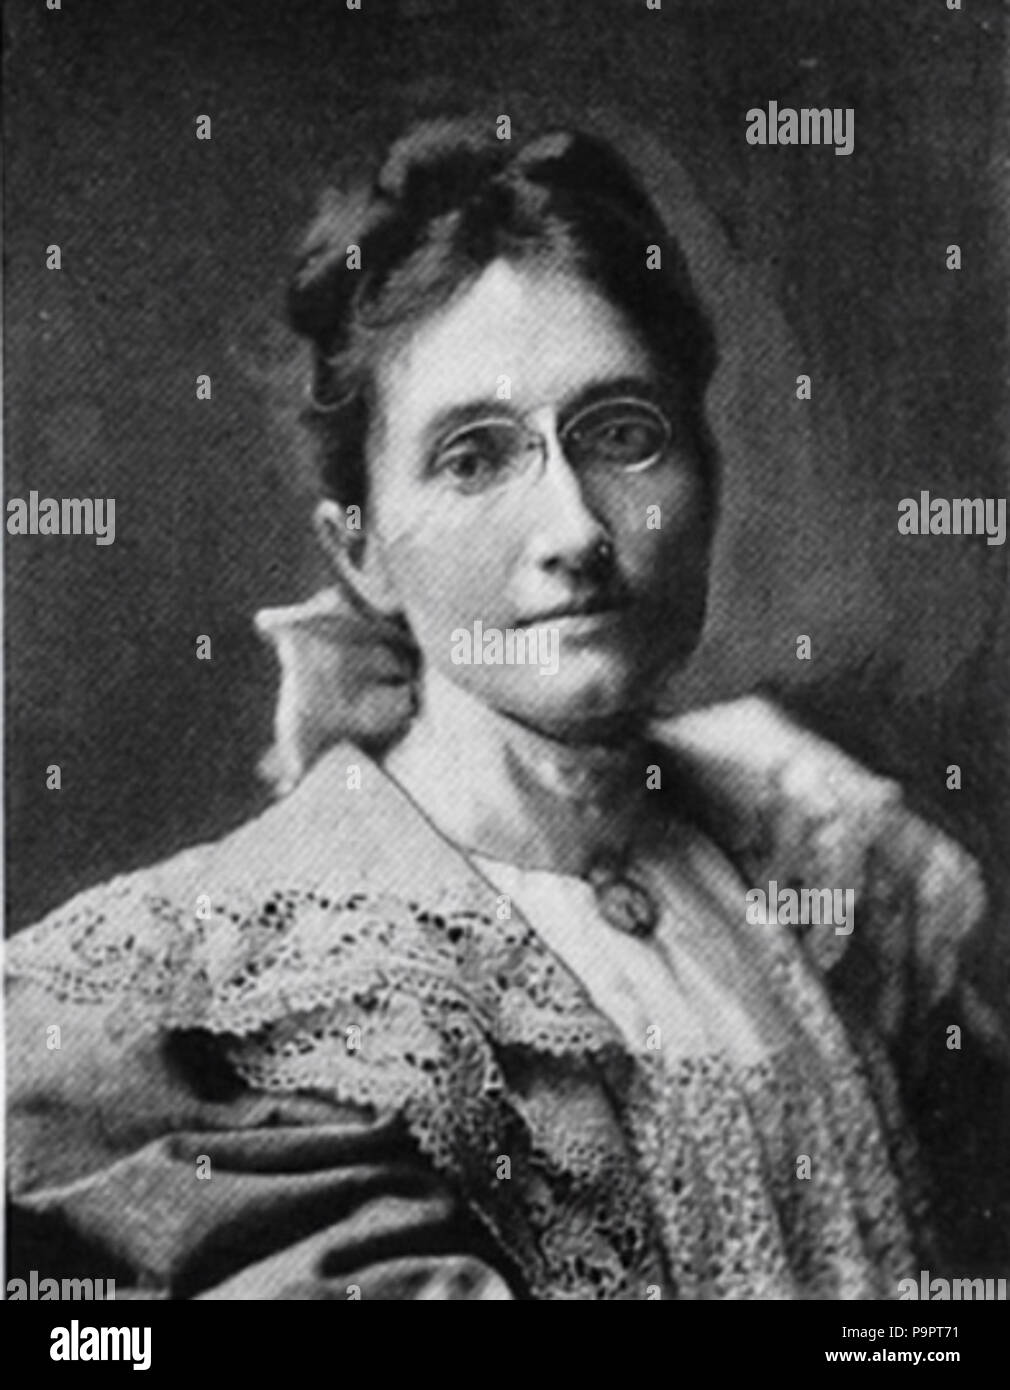 Alice barber stephens Black and White Stock Photos & Images - Alamy